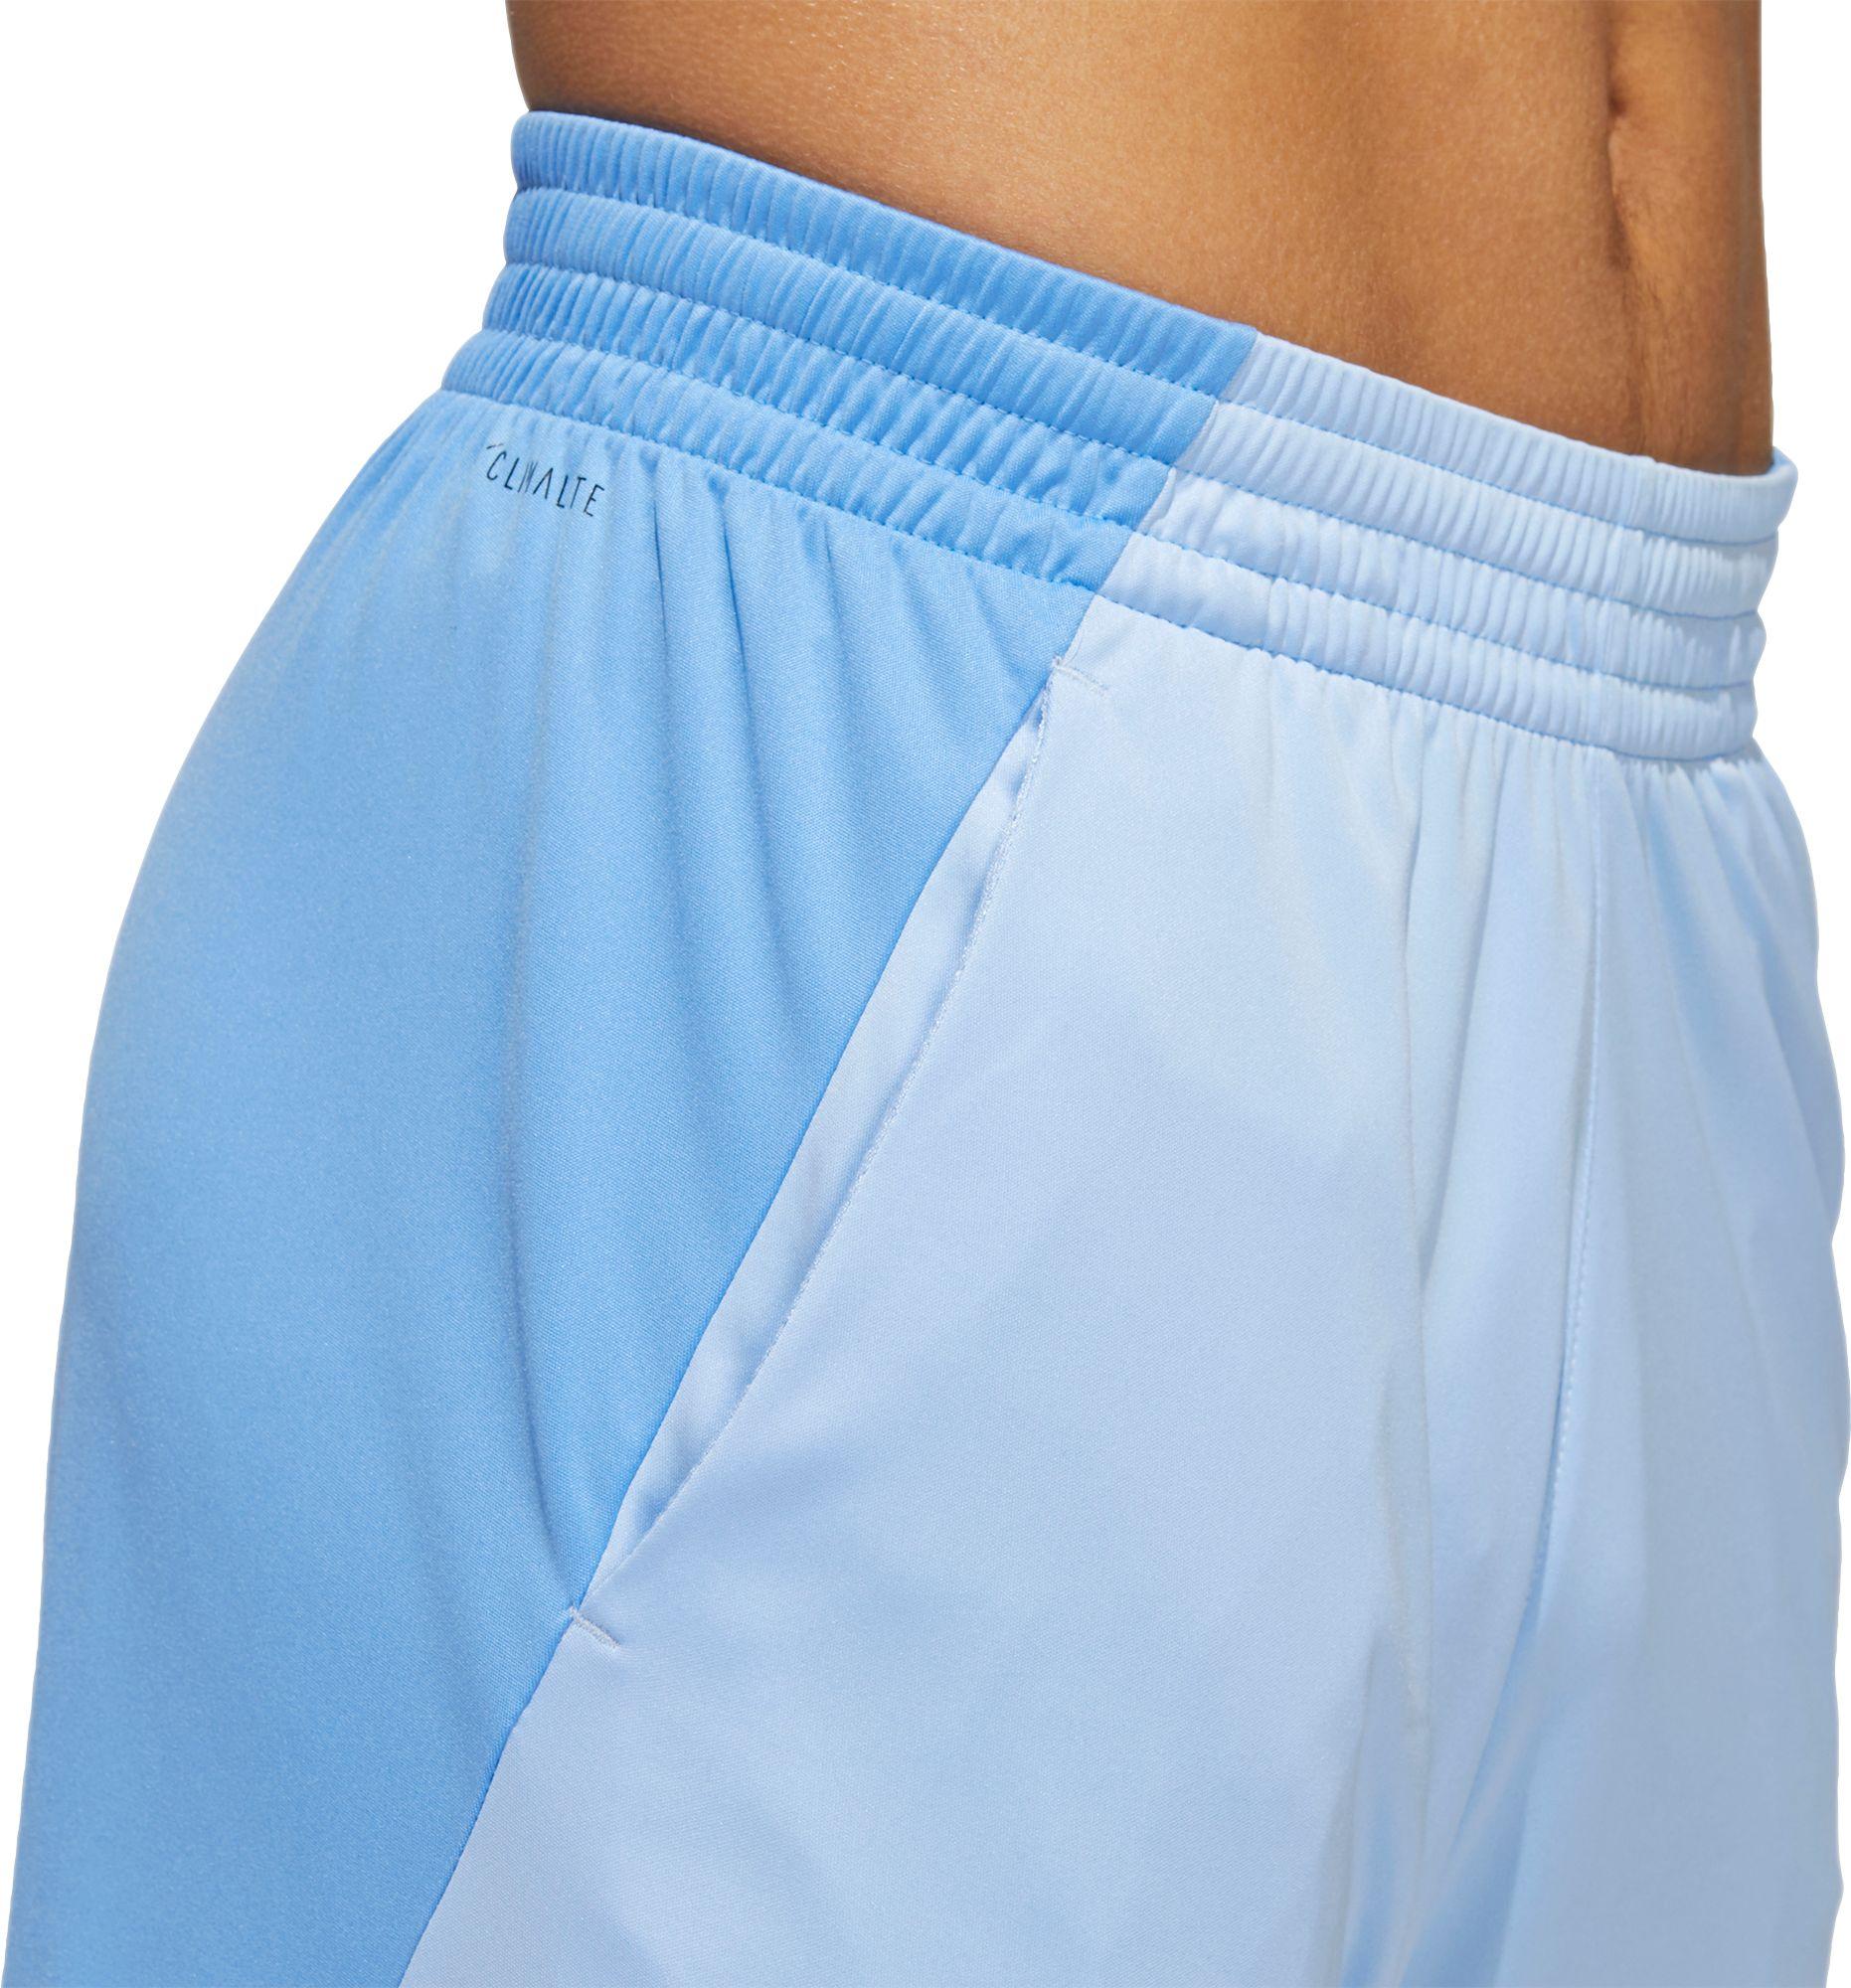 adidas Synthetic Pro Bounce Basketball Shorts in Blue for Men - Lyst